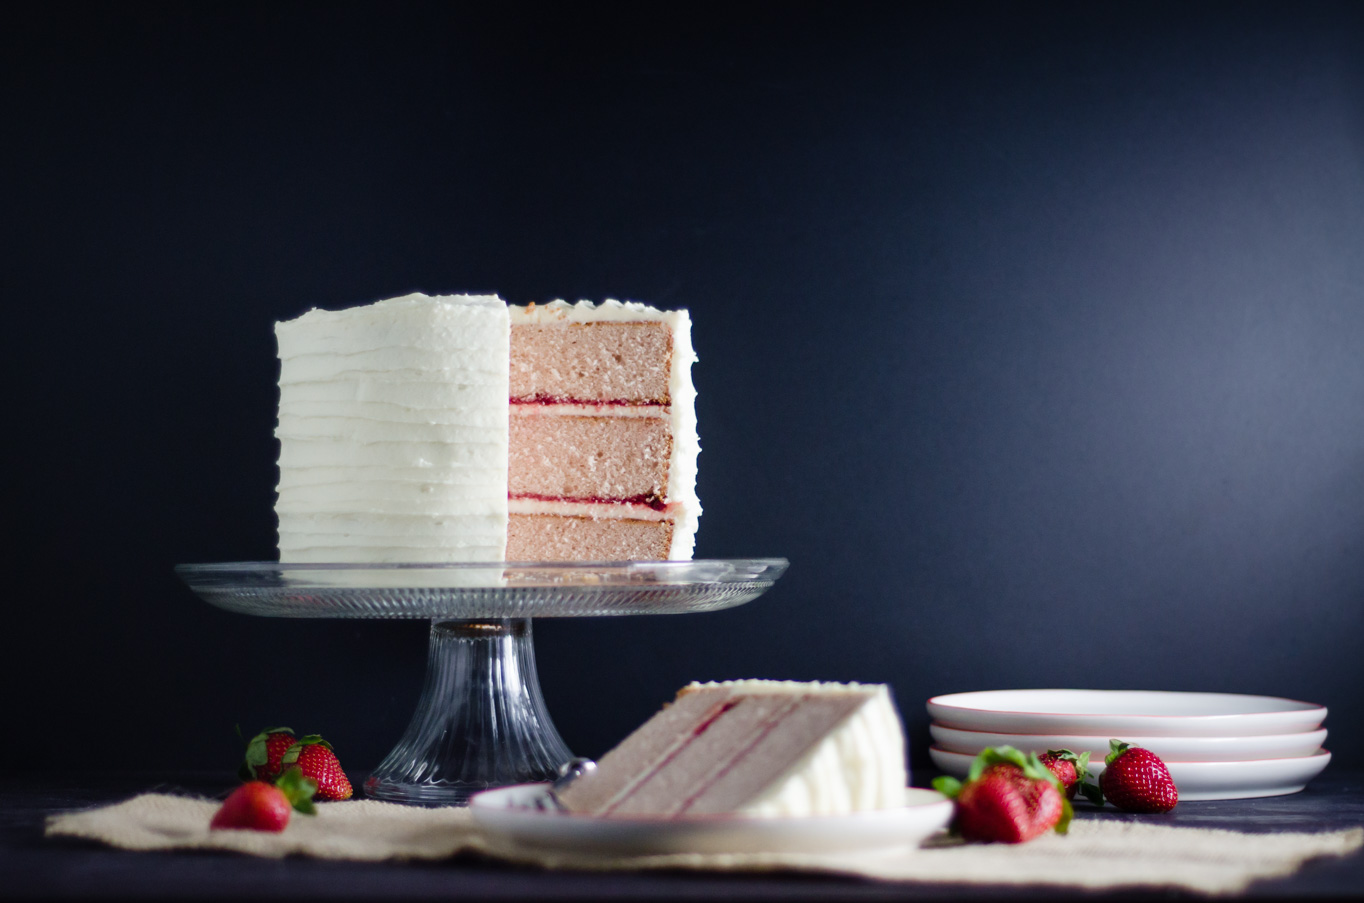 Strawberry Layer Cake with Cream Cheese Frosting